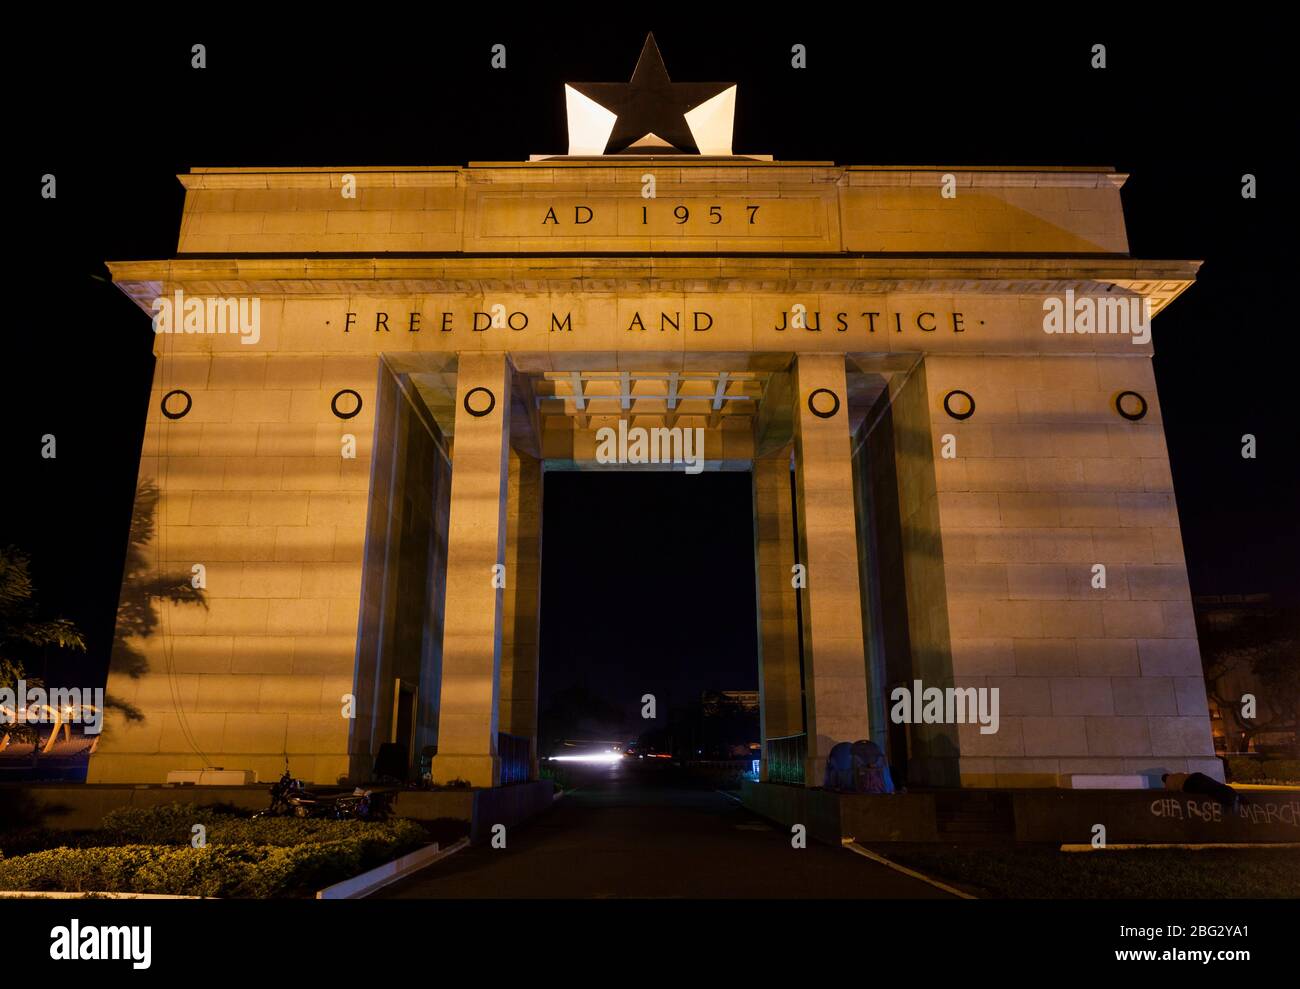 The Independence Arch / Black Star Gate at Independence Square in Accra, Ghana. Stock Photo